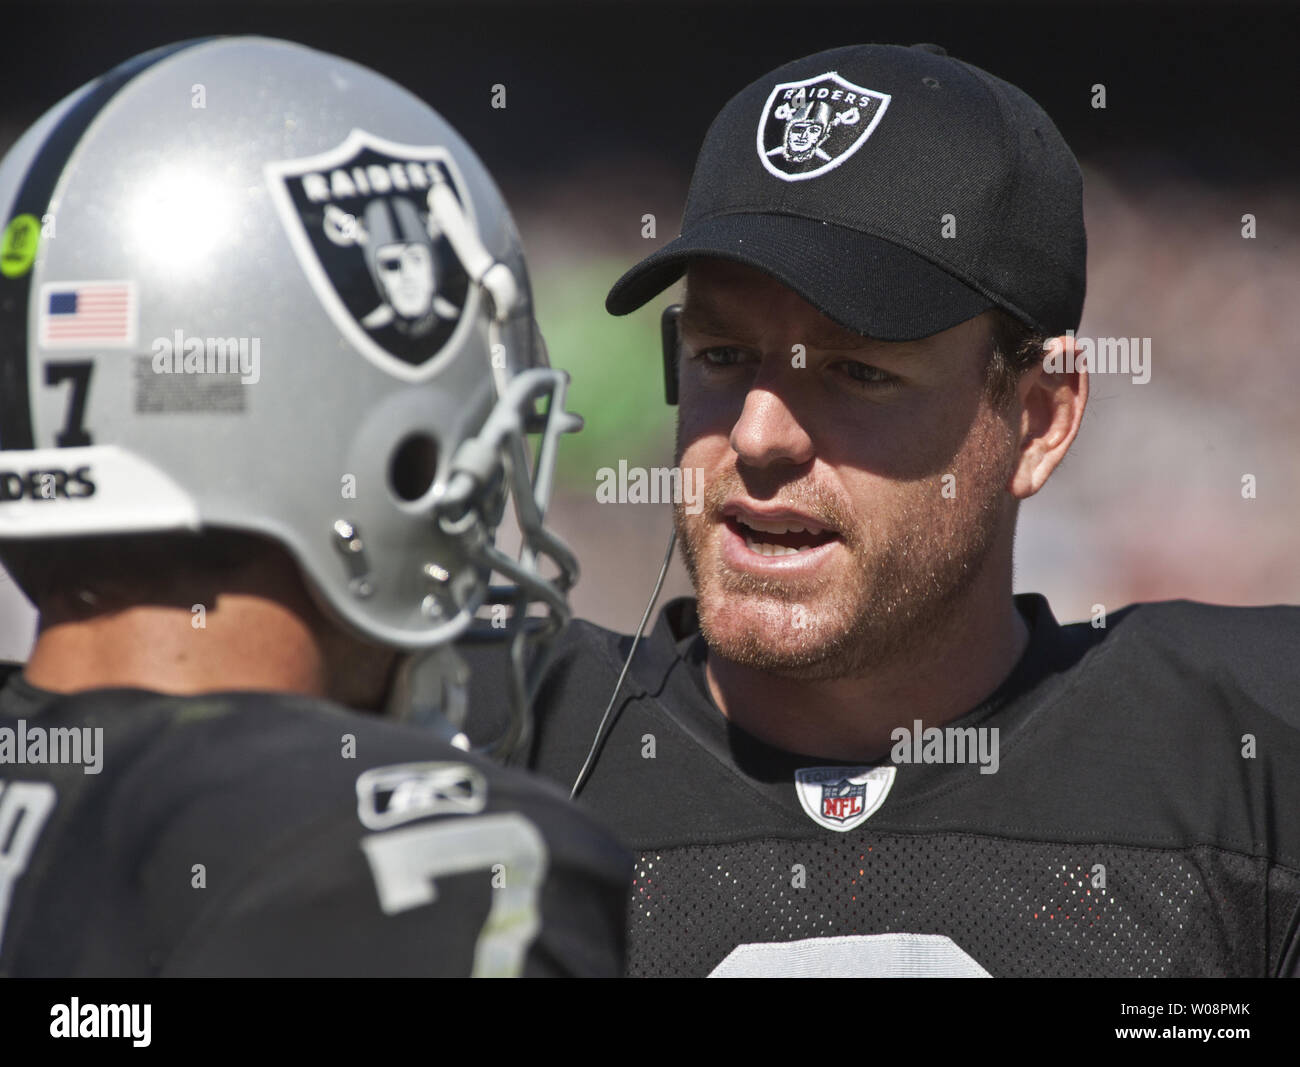 Oakland Raiders new QB Carson Palmer (R) talks with QB Kyle Boller (7) in the first half against the Kansas City Chiefs at the O.co Coliseum in Oakland, California on October 23, 2011. Each QB threw three interceptions in the 28-0 loss.   UPI/Terry Schmitt Stock Photo